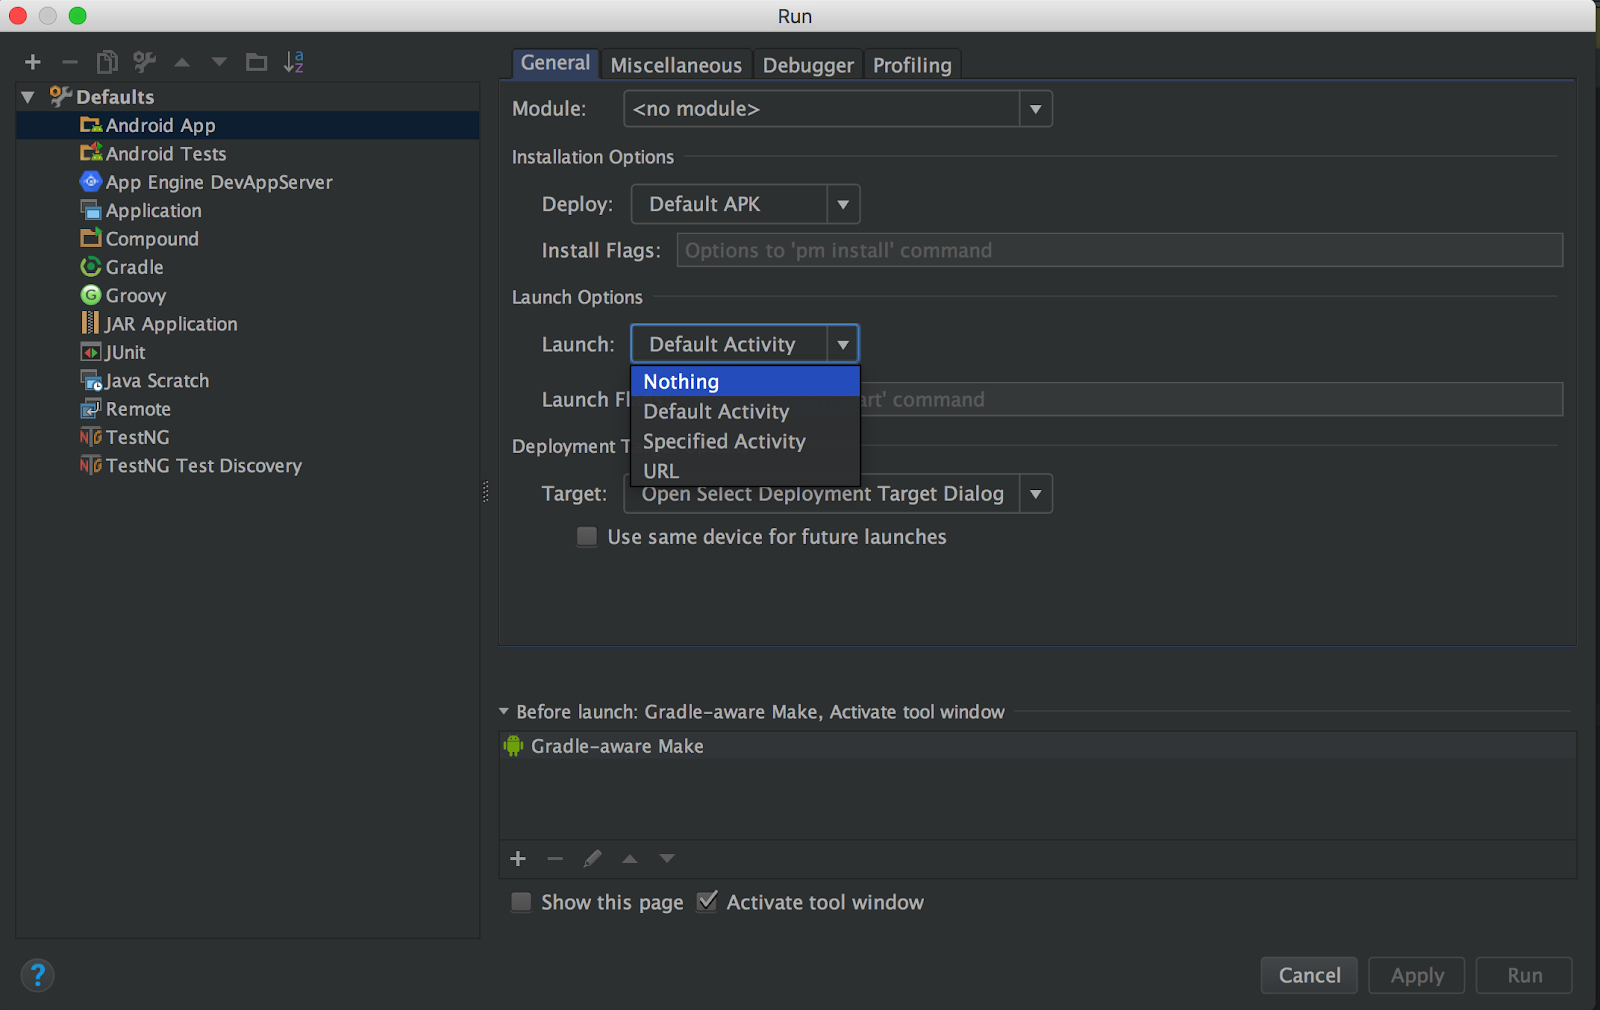 Drop down to configure run settings to launch a service using Android Studio.